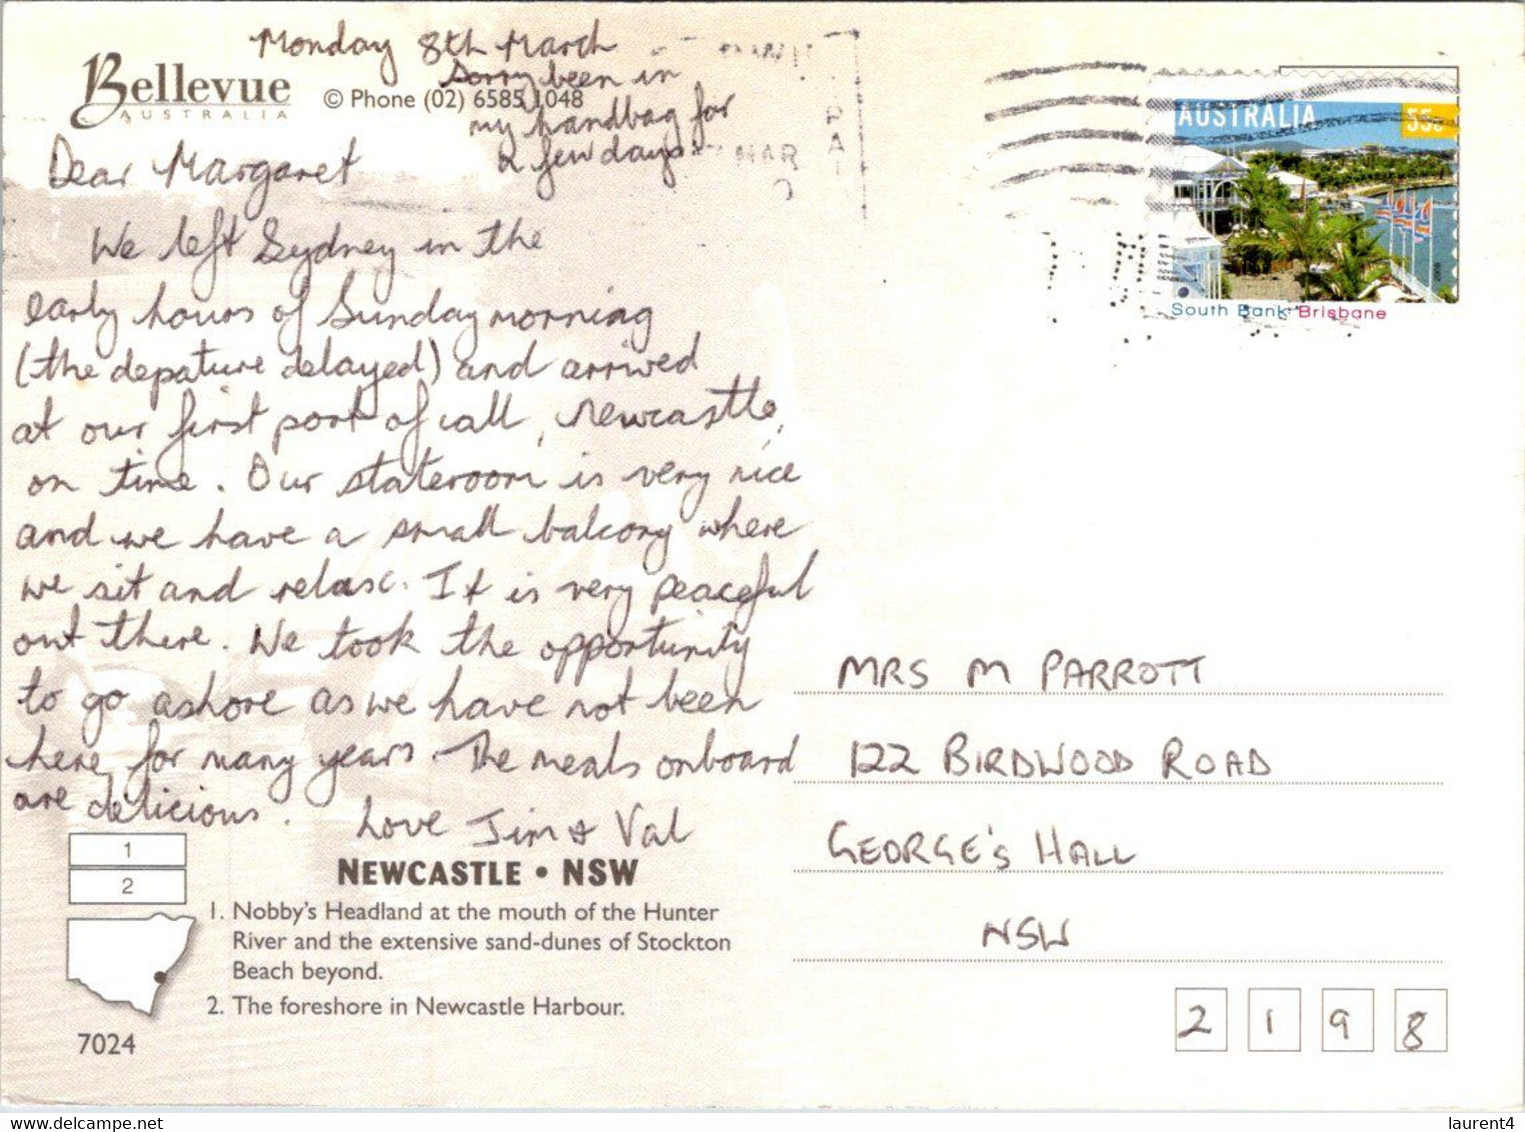 (2 P 15) Australia - NSW - Newcaste - Great Barrier Reef (with South Bank Brisbane Stamp) - Newcastle